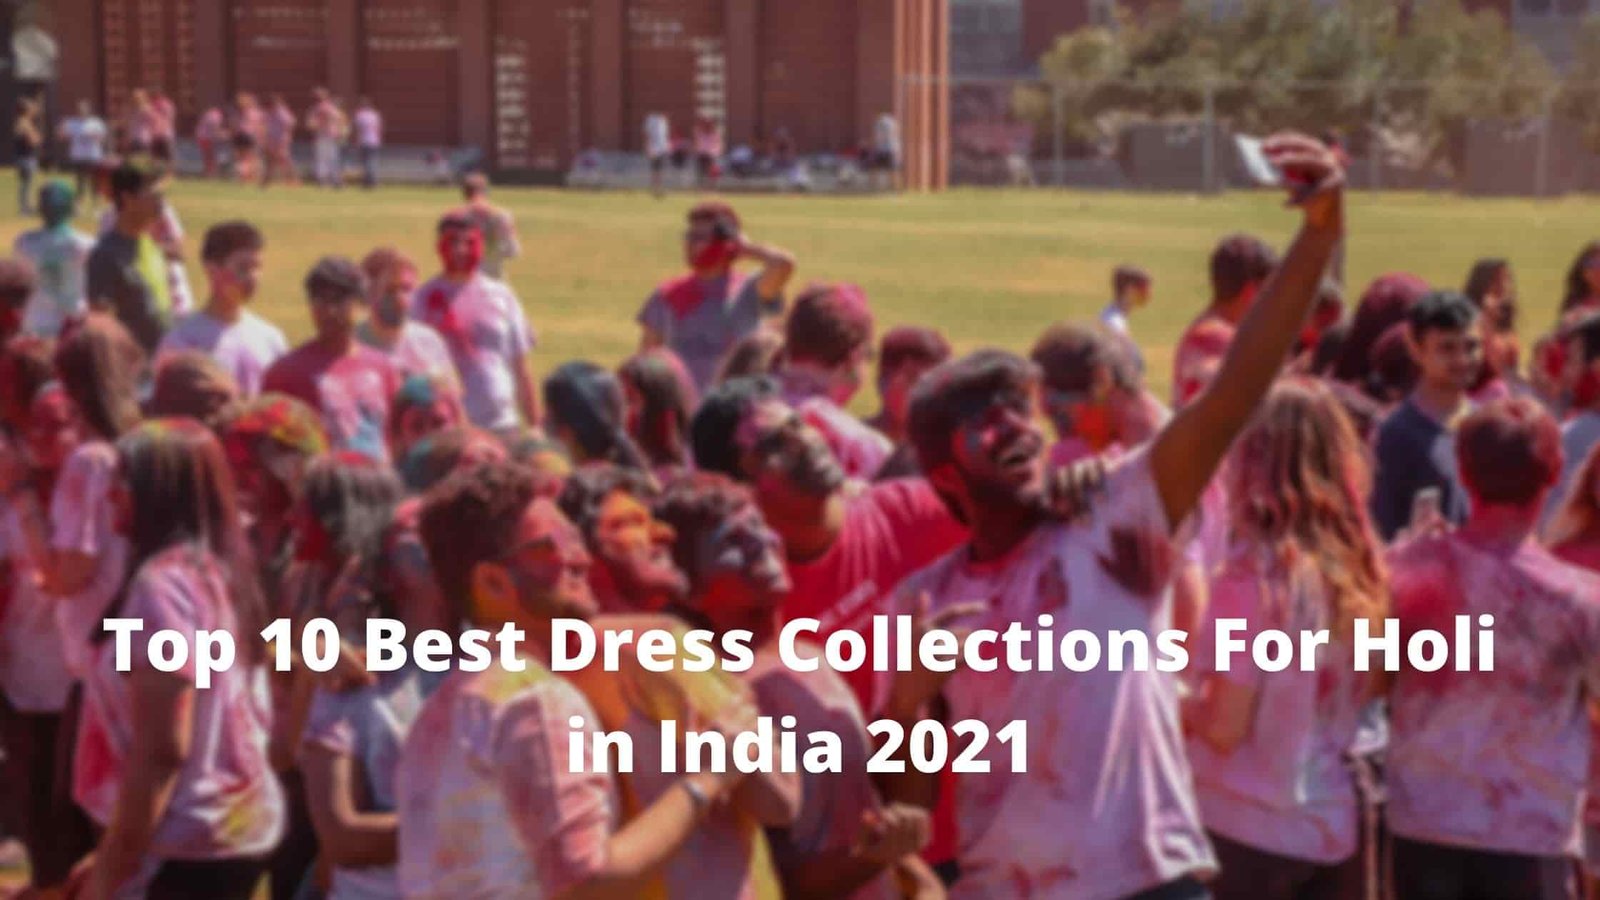 Top 10 Best Dress Collections For Holi in India 2021